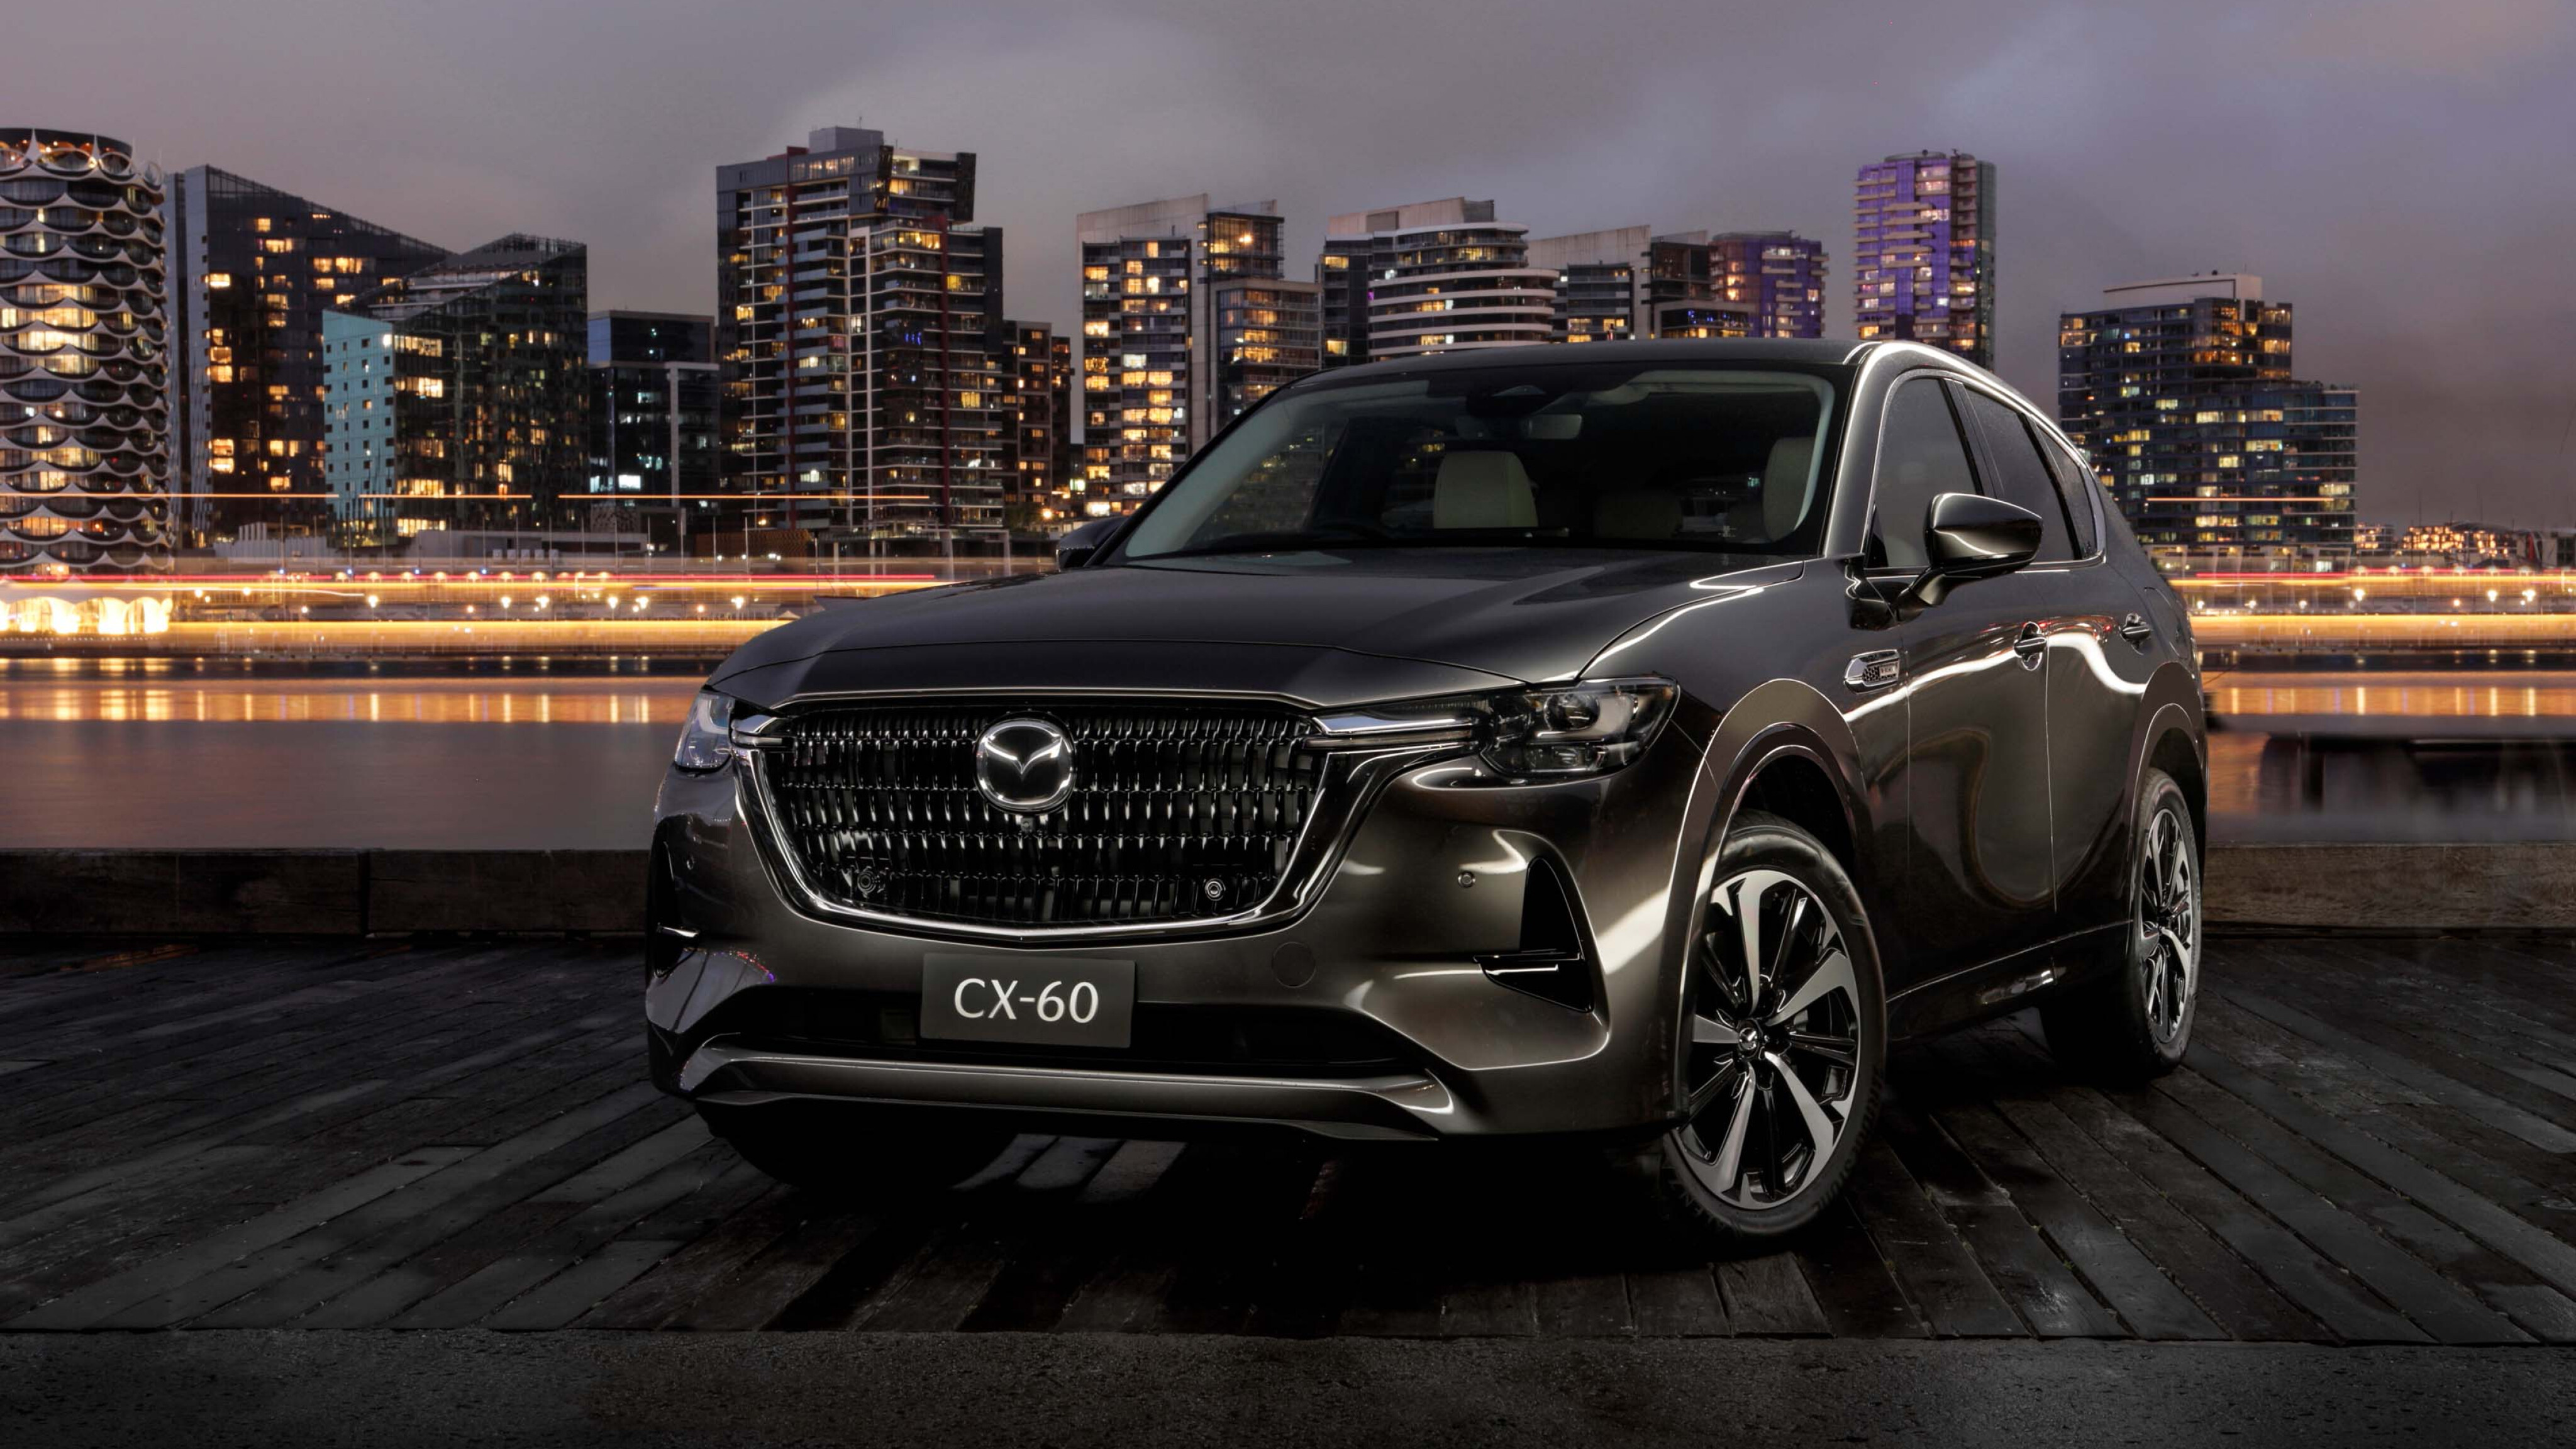 2022 Mazda CX-60: Everything we know about the new large SUV